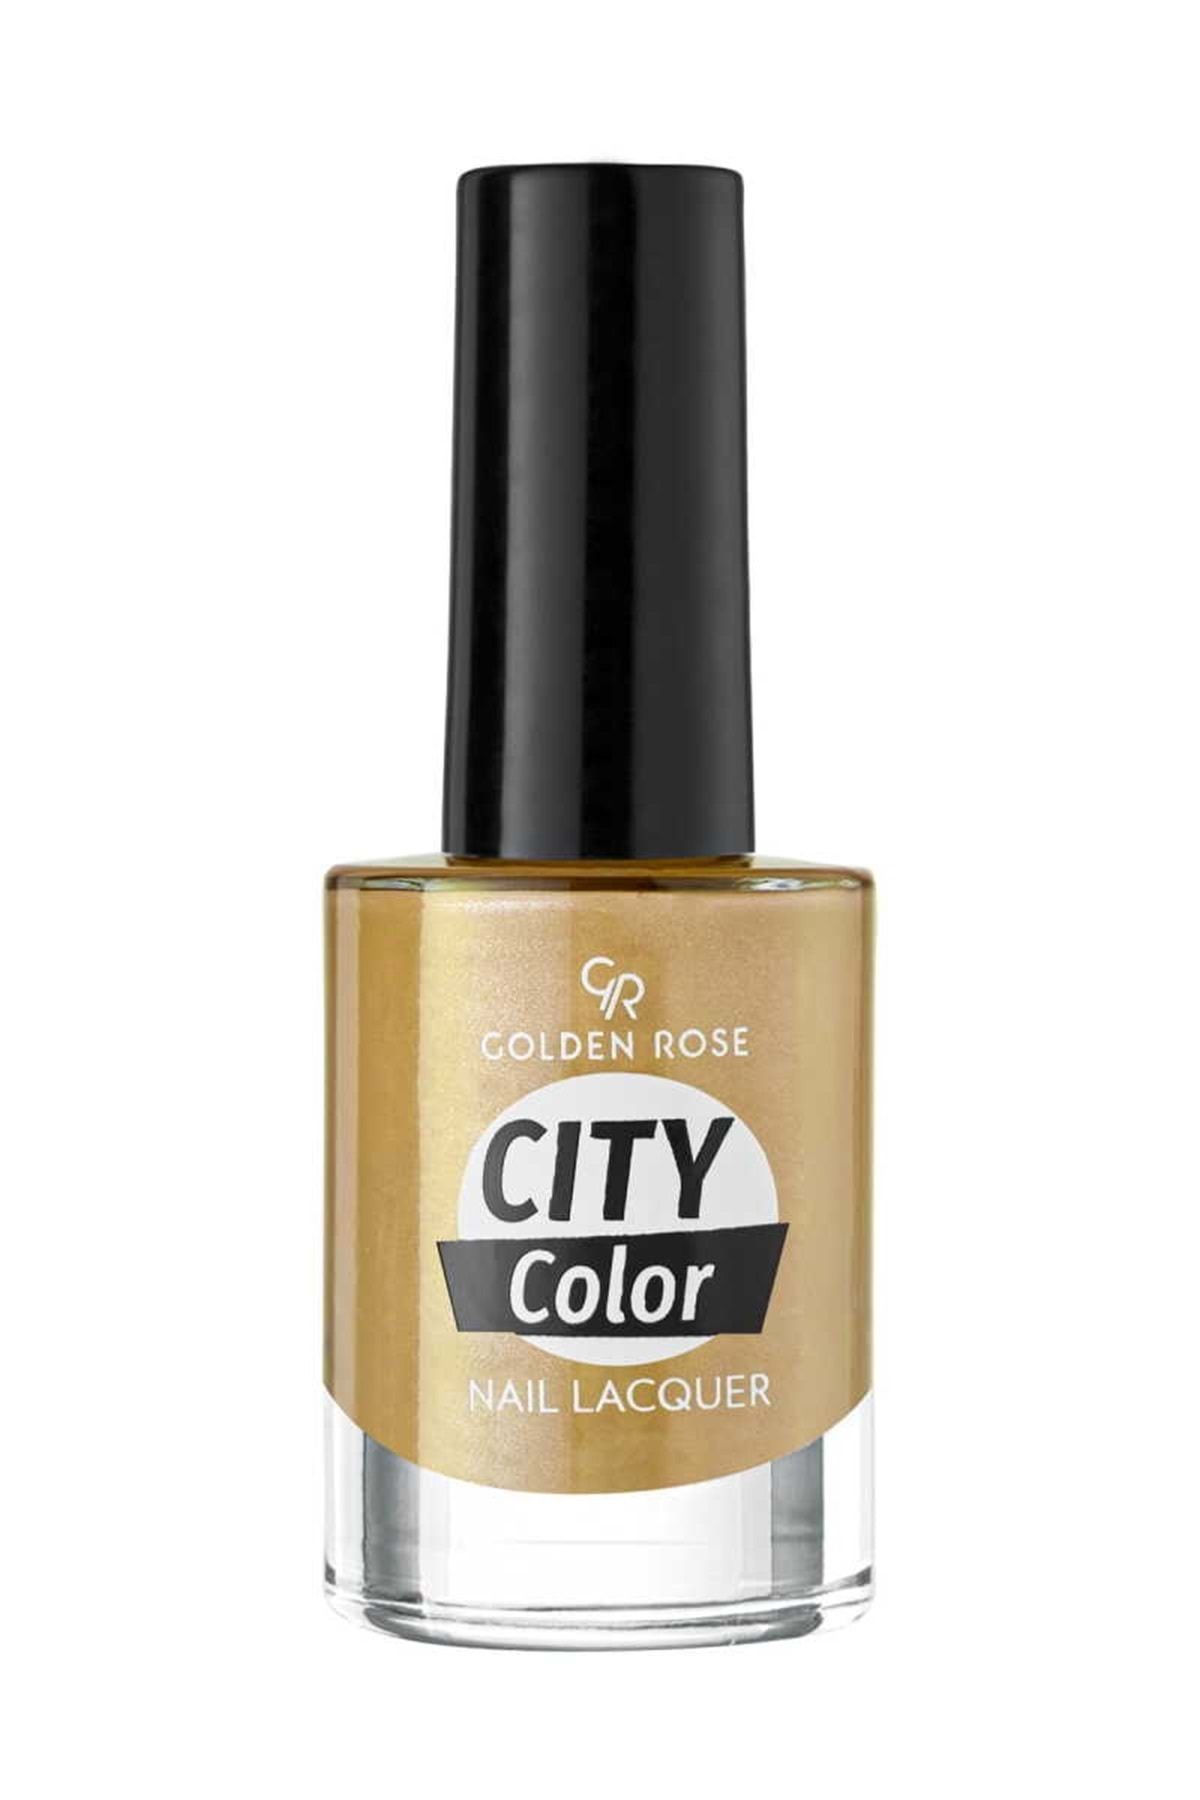 Golden Rose City Color Nail Lacquer Oje 40